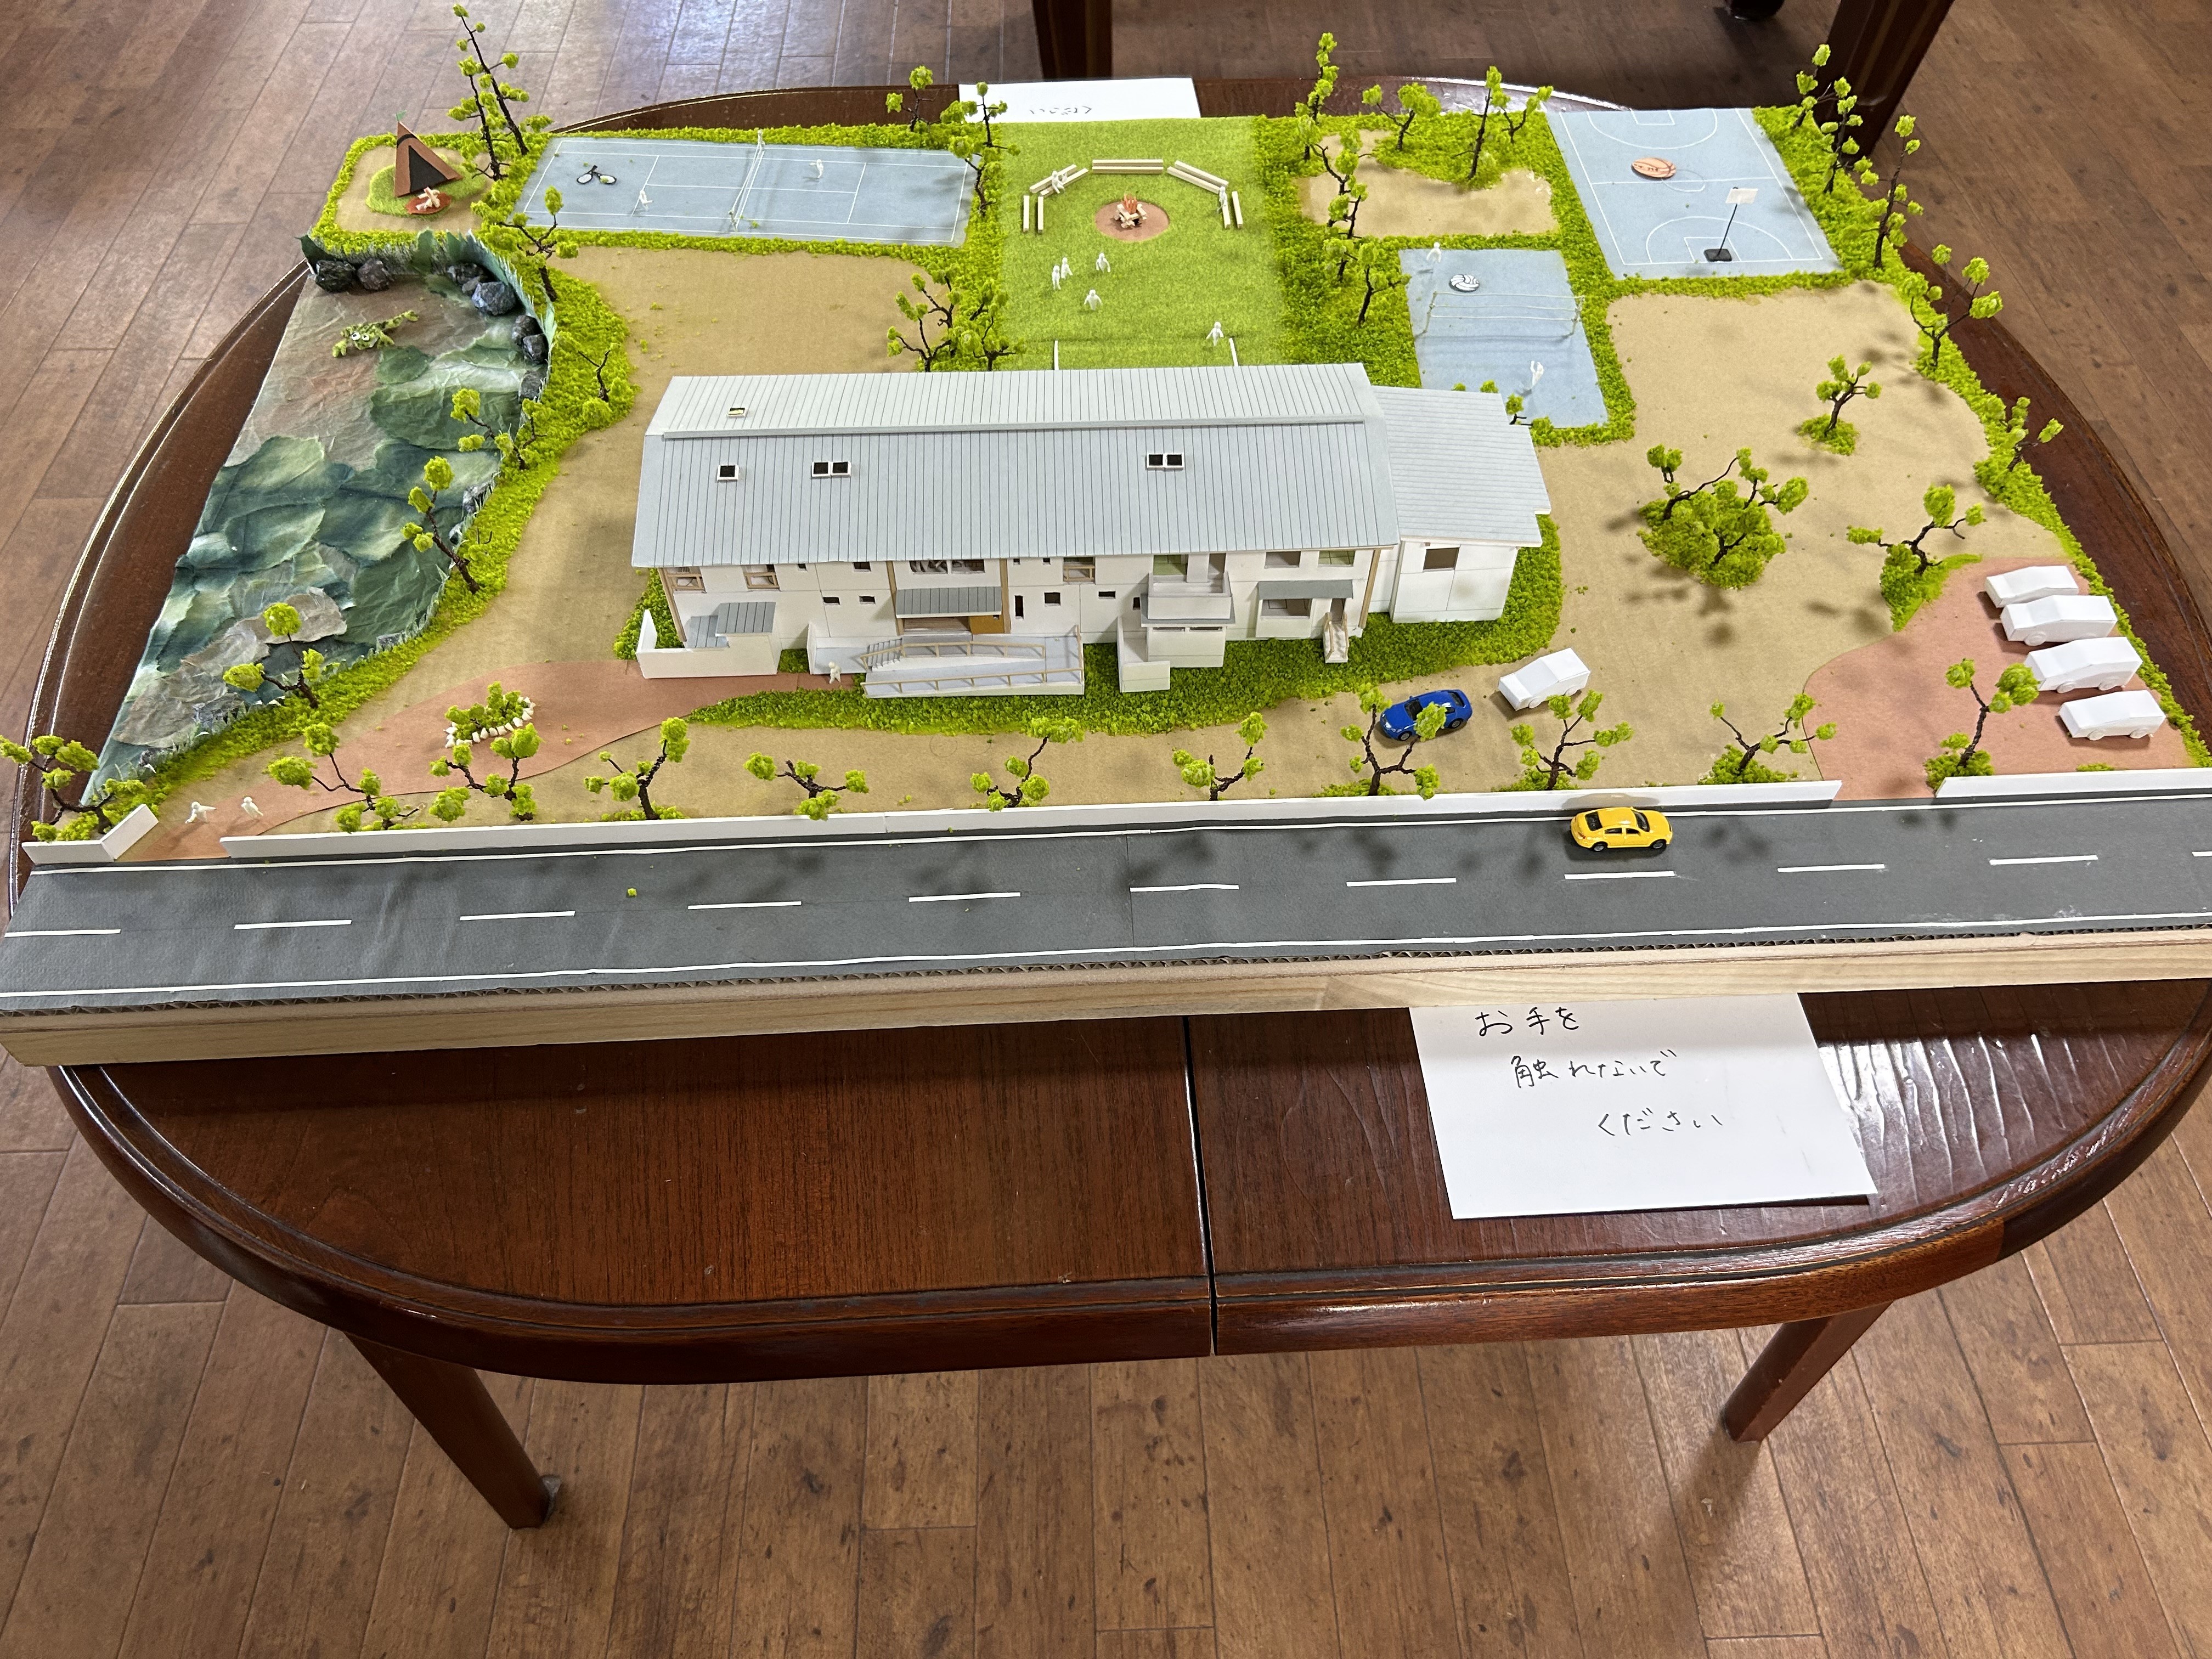 Model of the new building